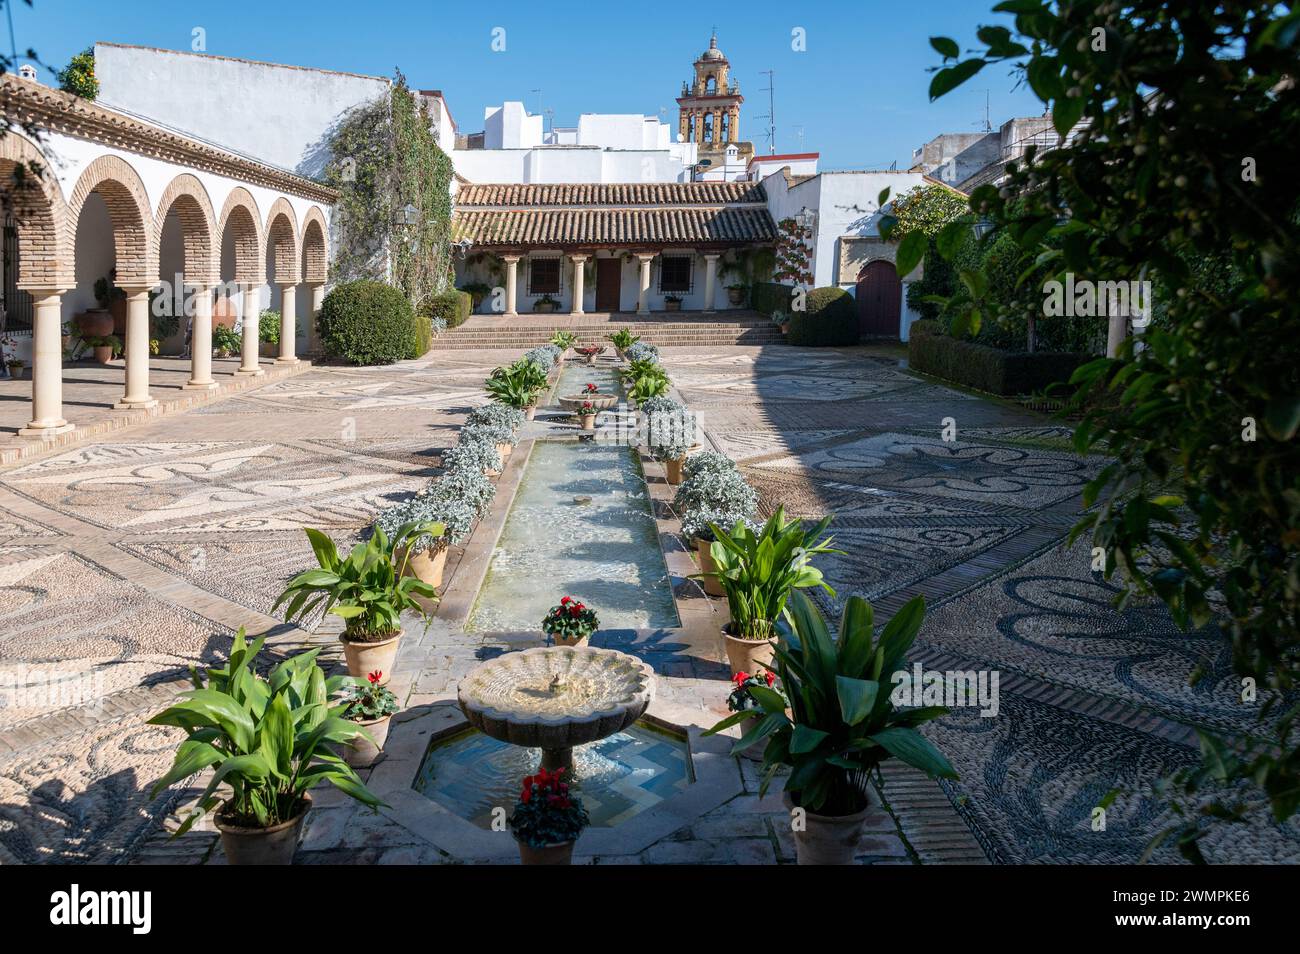 One of the largest of the twelve patios (courtyards) with a long oblong-shaped pond is the Patio de las Columnas (Courtyard of the Columns)  at the Pa Stock Photo